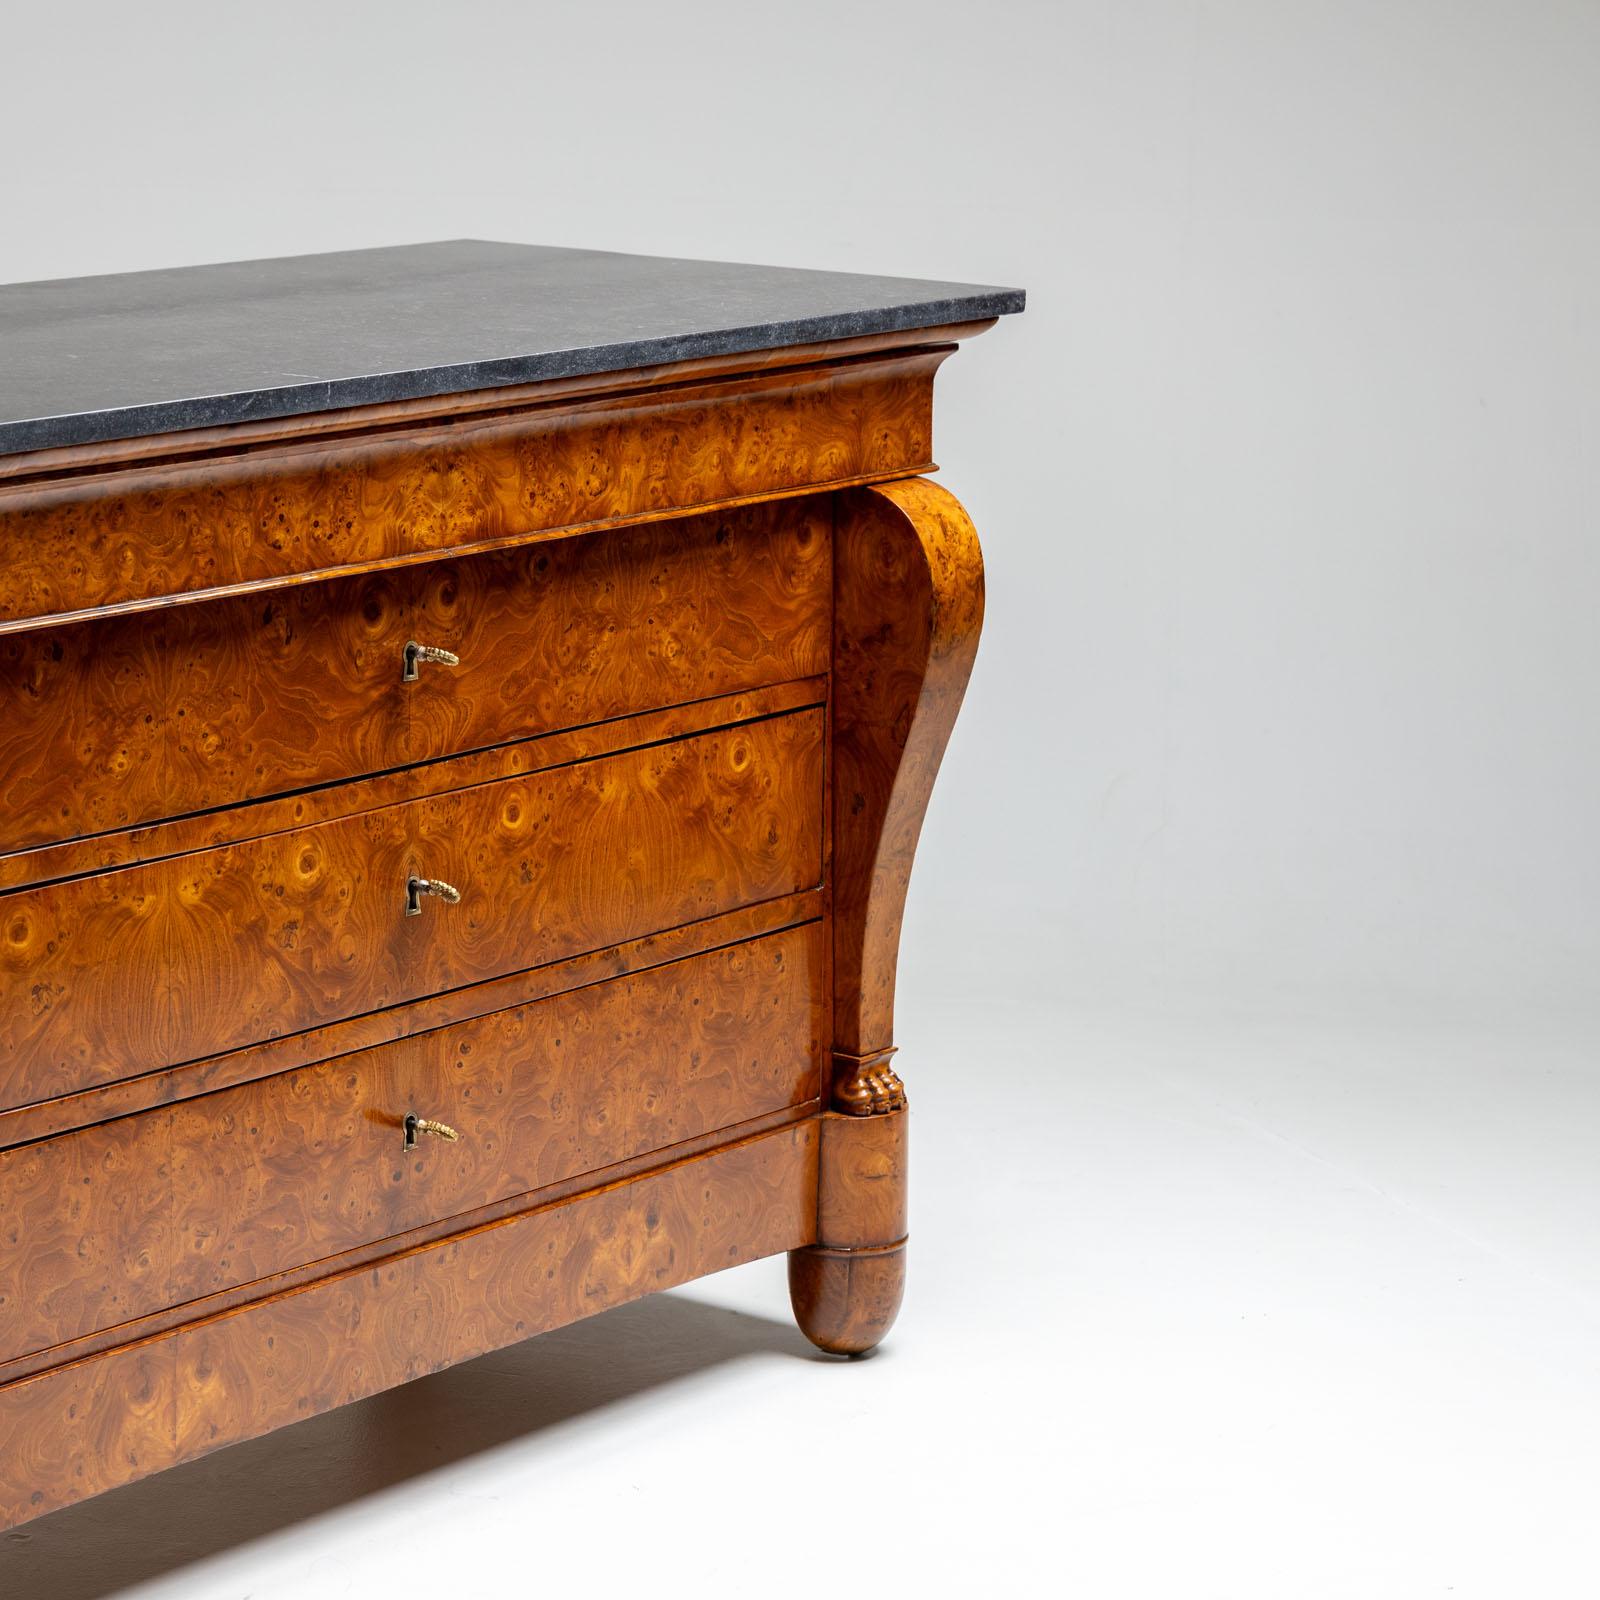 Veneer Chest of drawers with stone top, France, 1st half of the 19th century